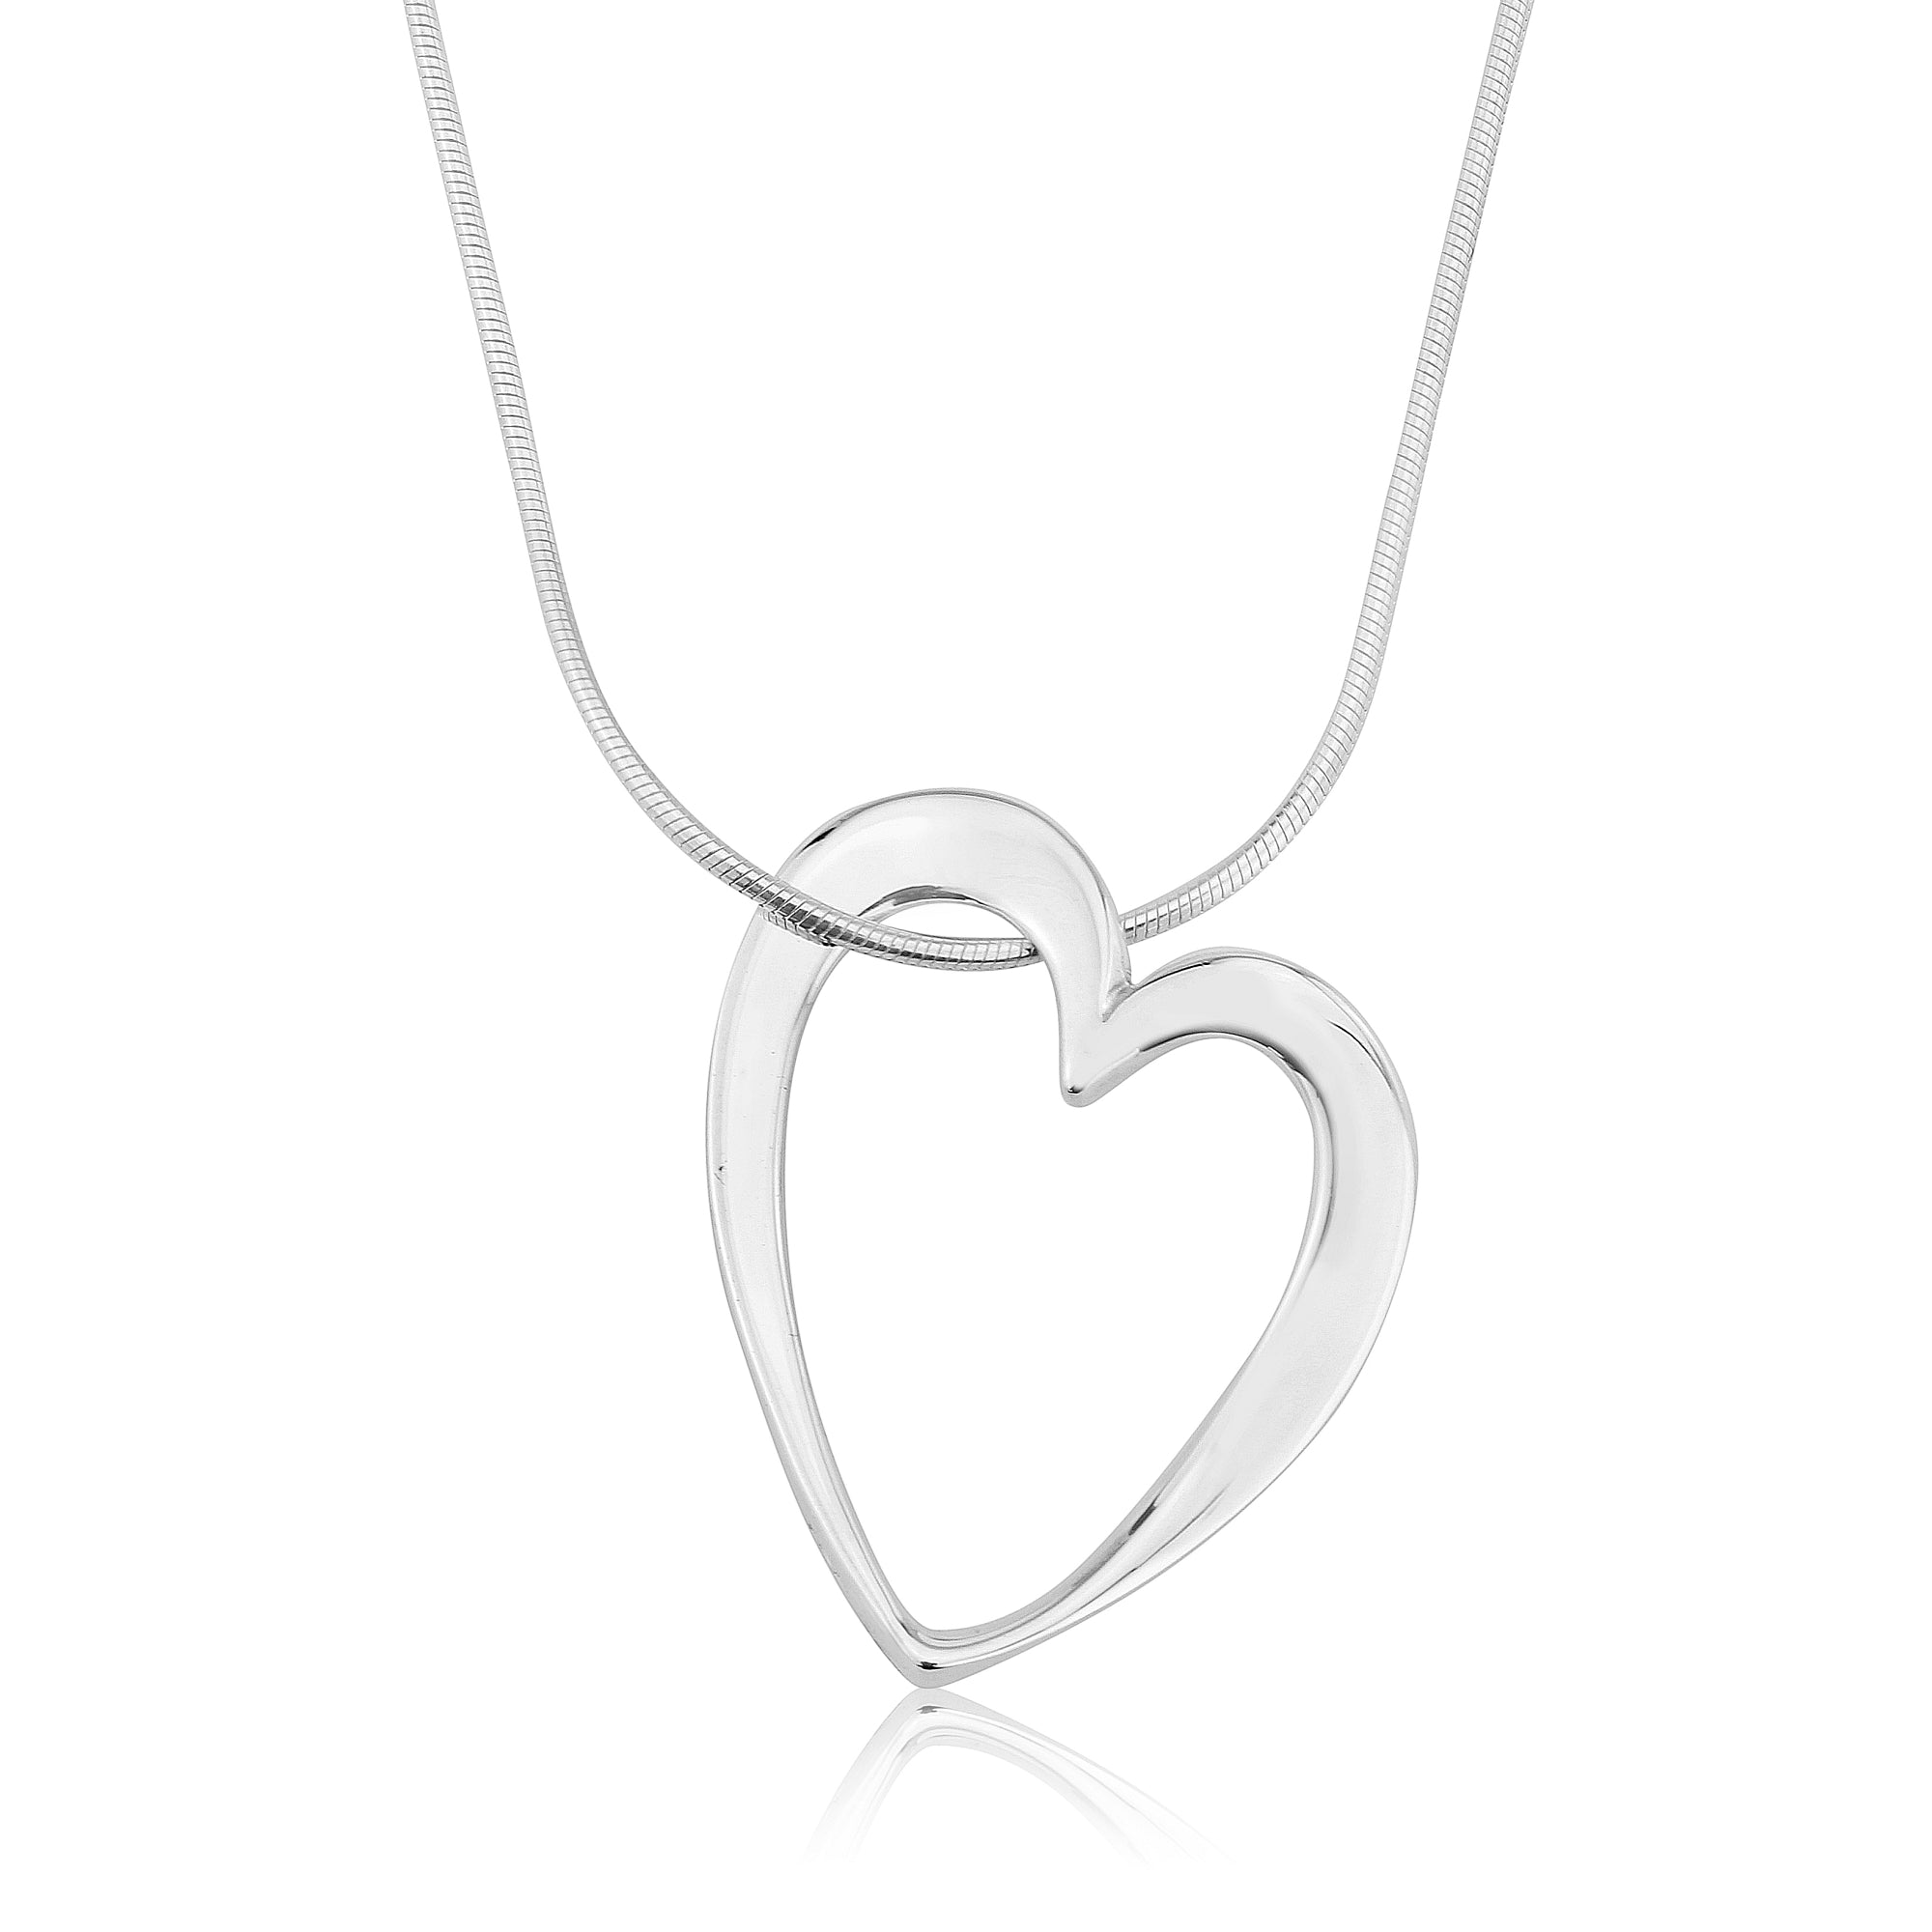 Handcrafted Silver Heart Esme Necklace